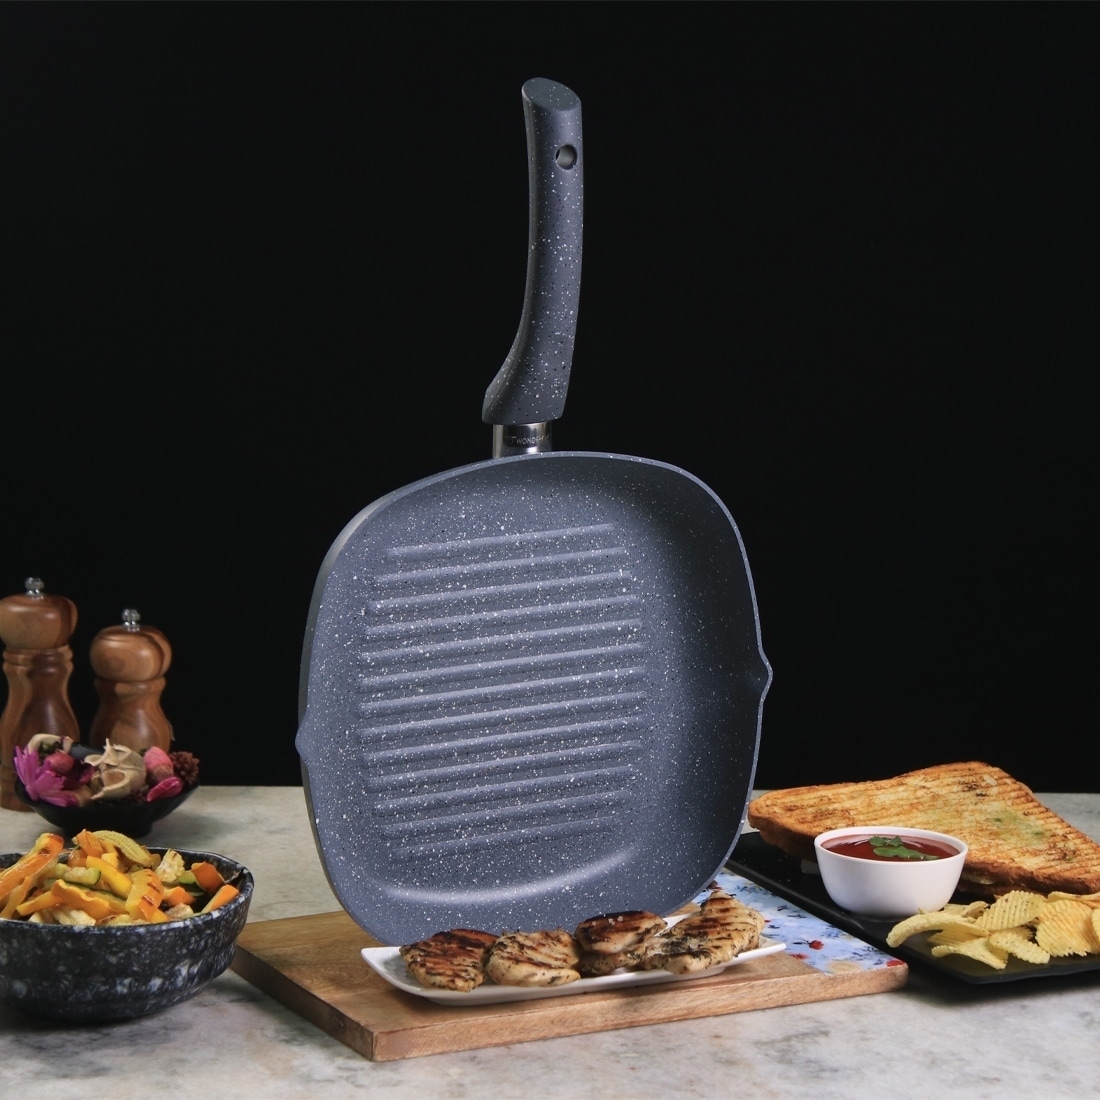 Ebony Non-Stick Dosa Tawa Griddle Pan 26.5 cm with Wooden Handle, Black